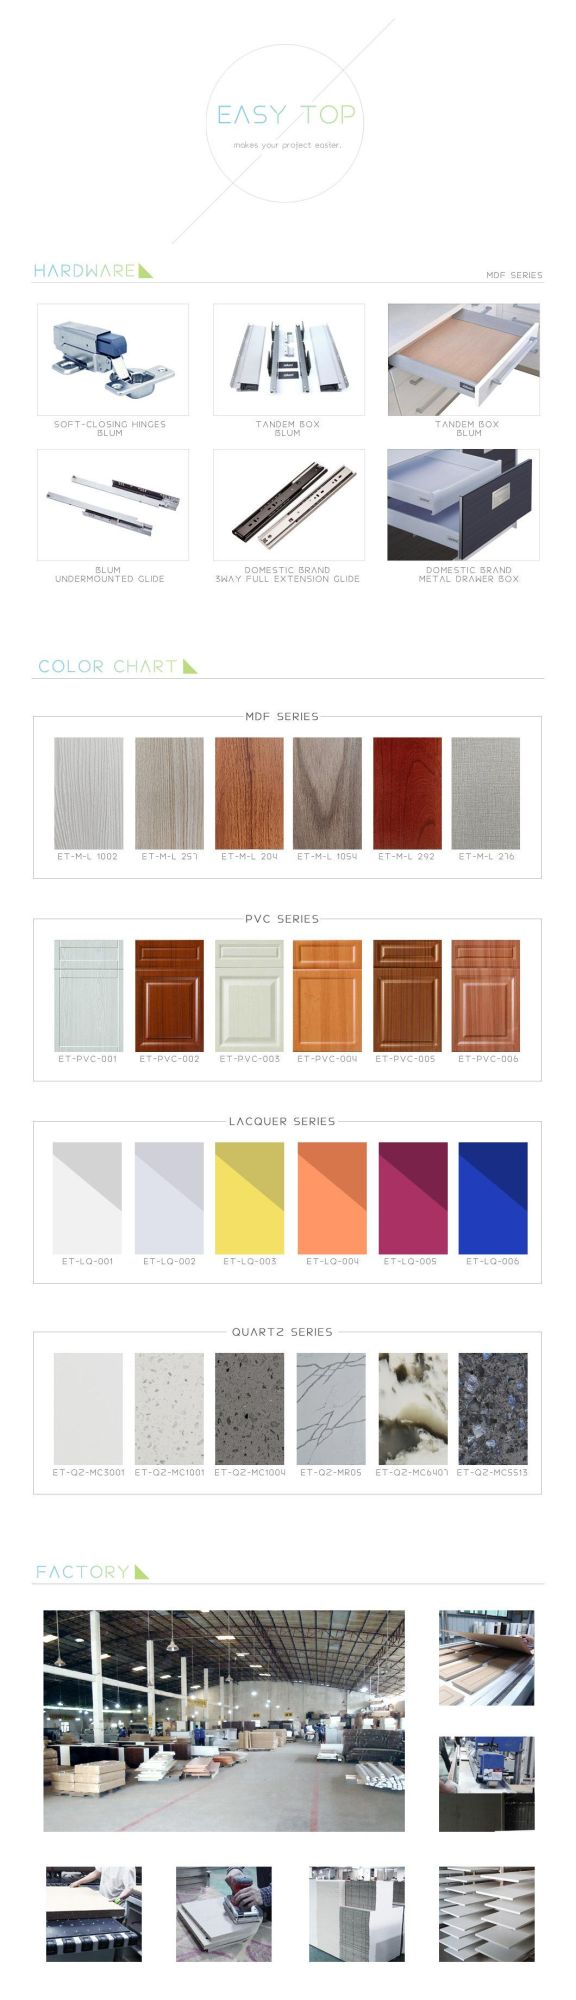 OEM European Style Lacquer Finish Combination Wooden MDF Door Kitchen Cabinet Design